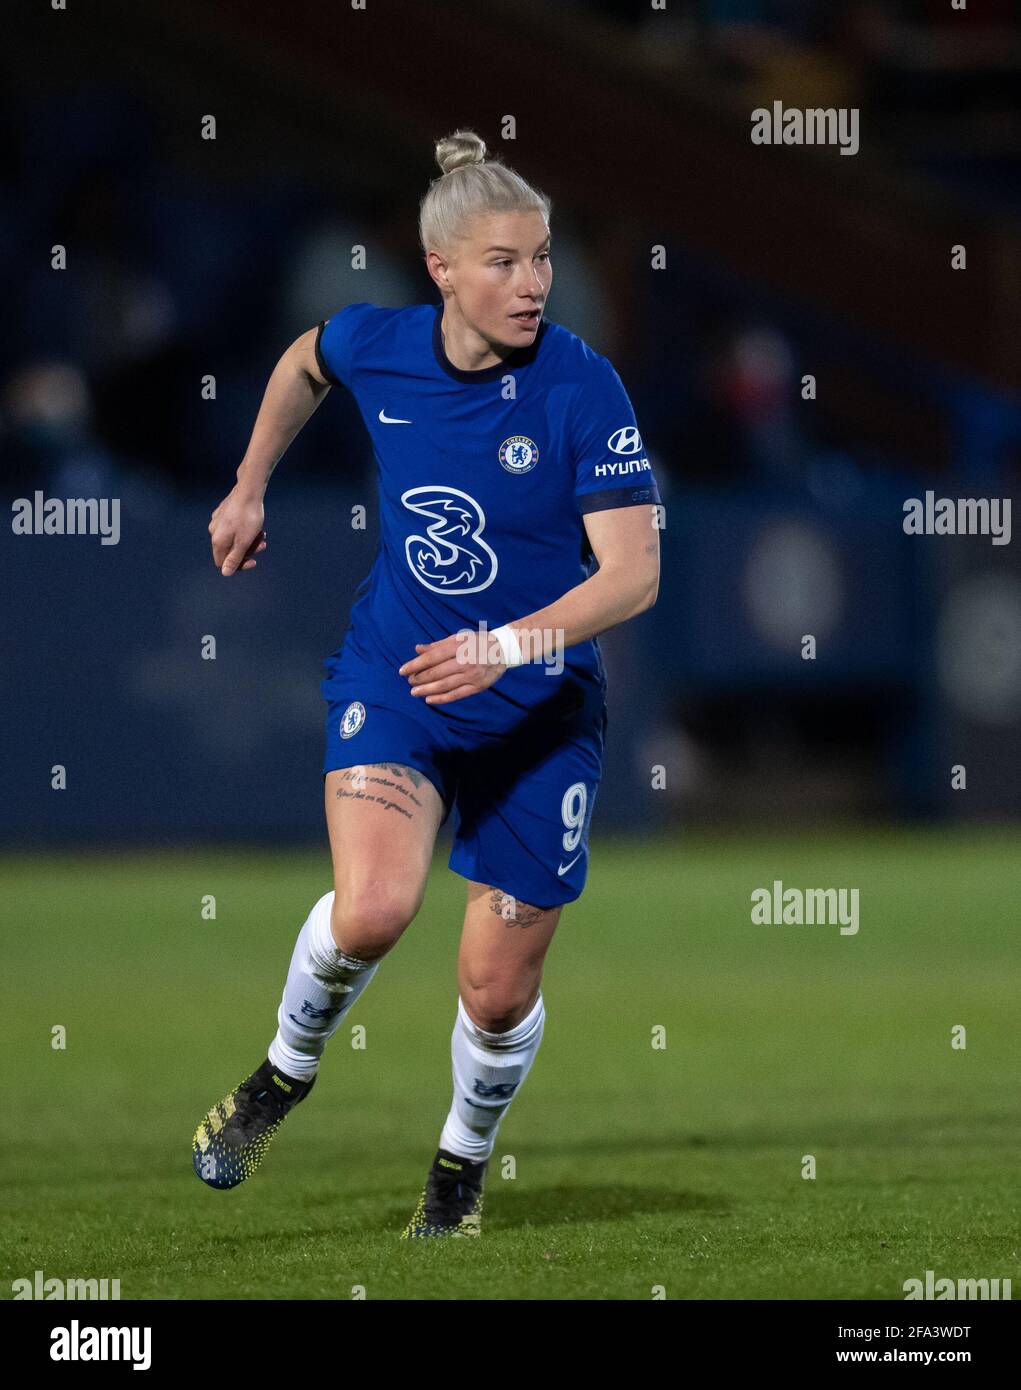 Bethany England of Chelsea Women during the Women's FA Cup match between Chelsea Women and London City Lionesses at the Kingsmeadow Stadium, Kingston, Stock Photo